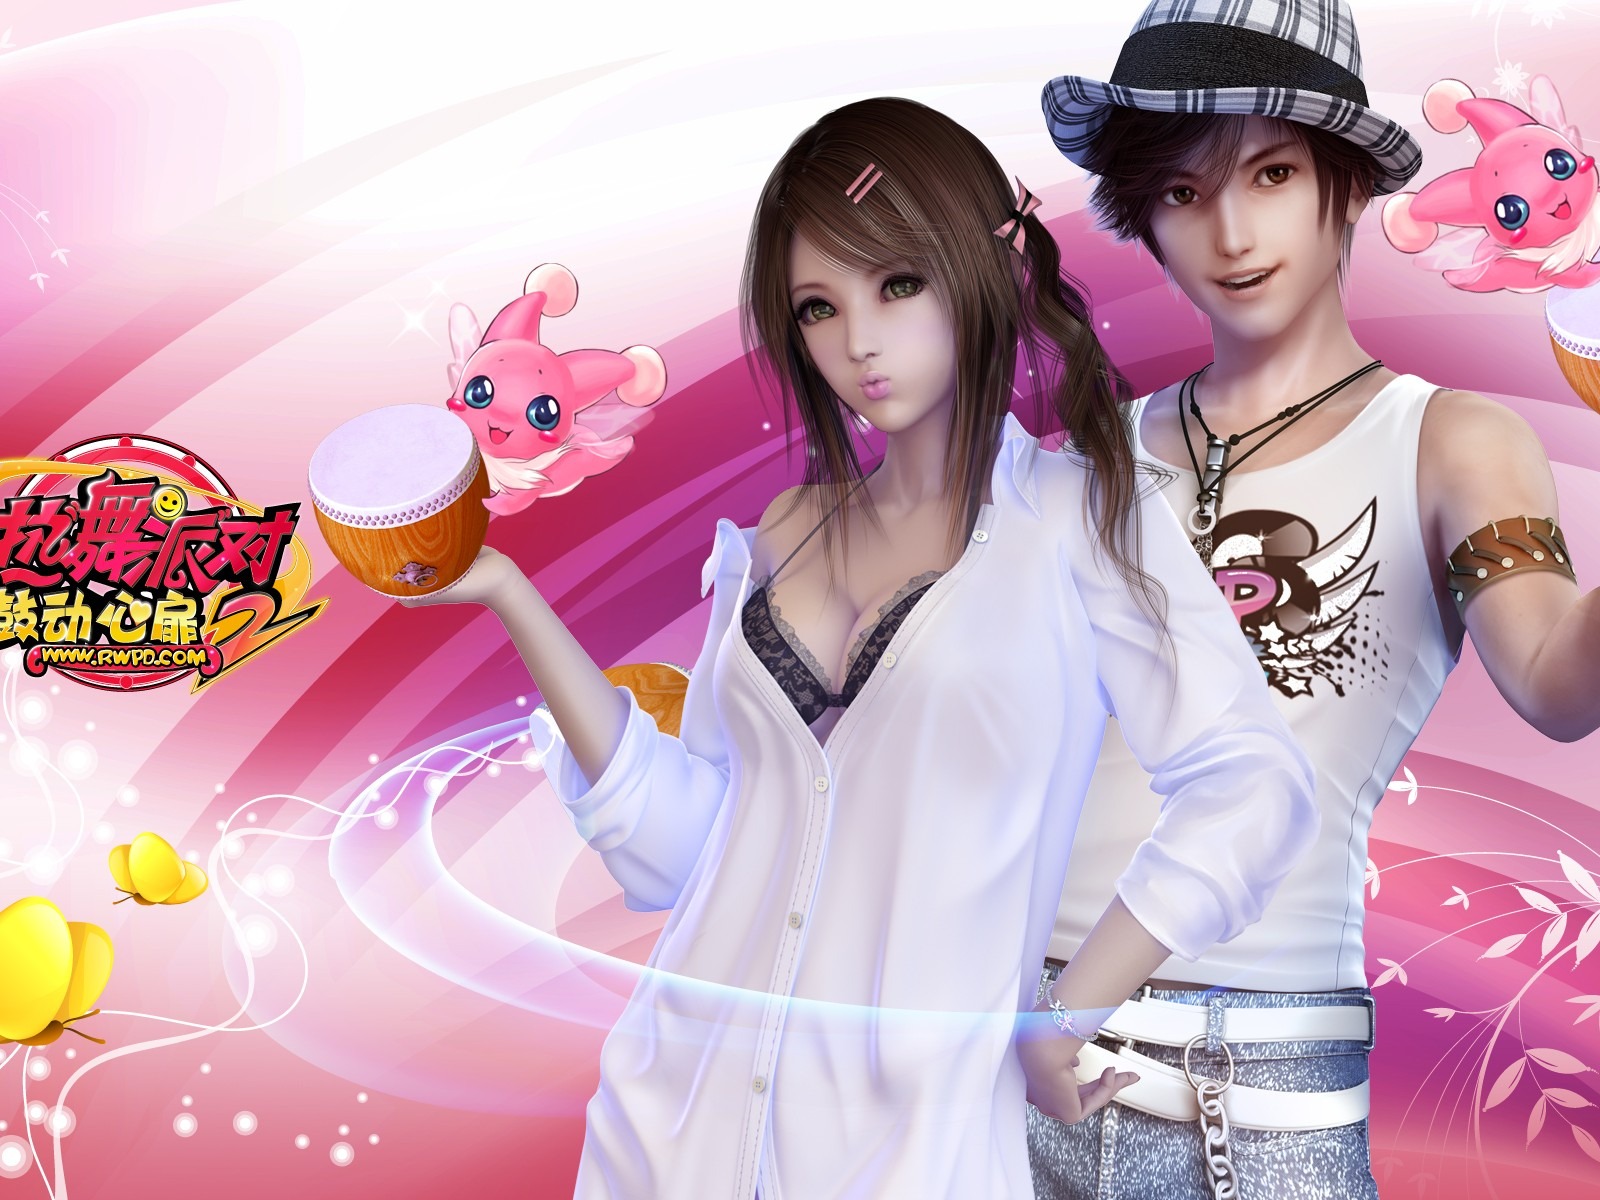 Online game Hot Dance Party II official wallpapers #21 - 1600x1200